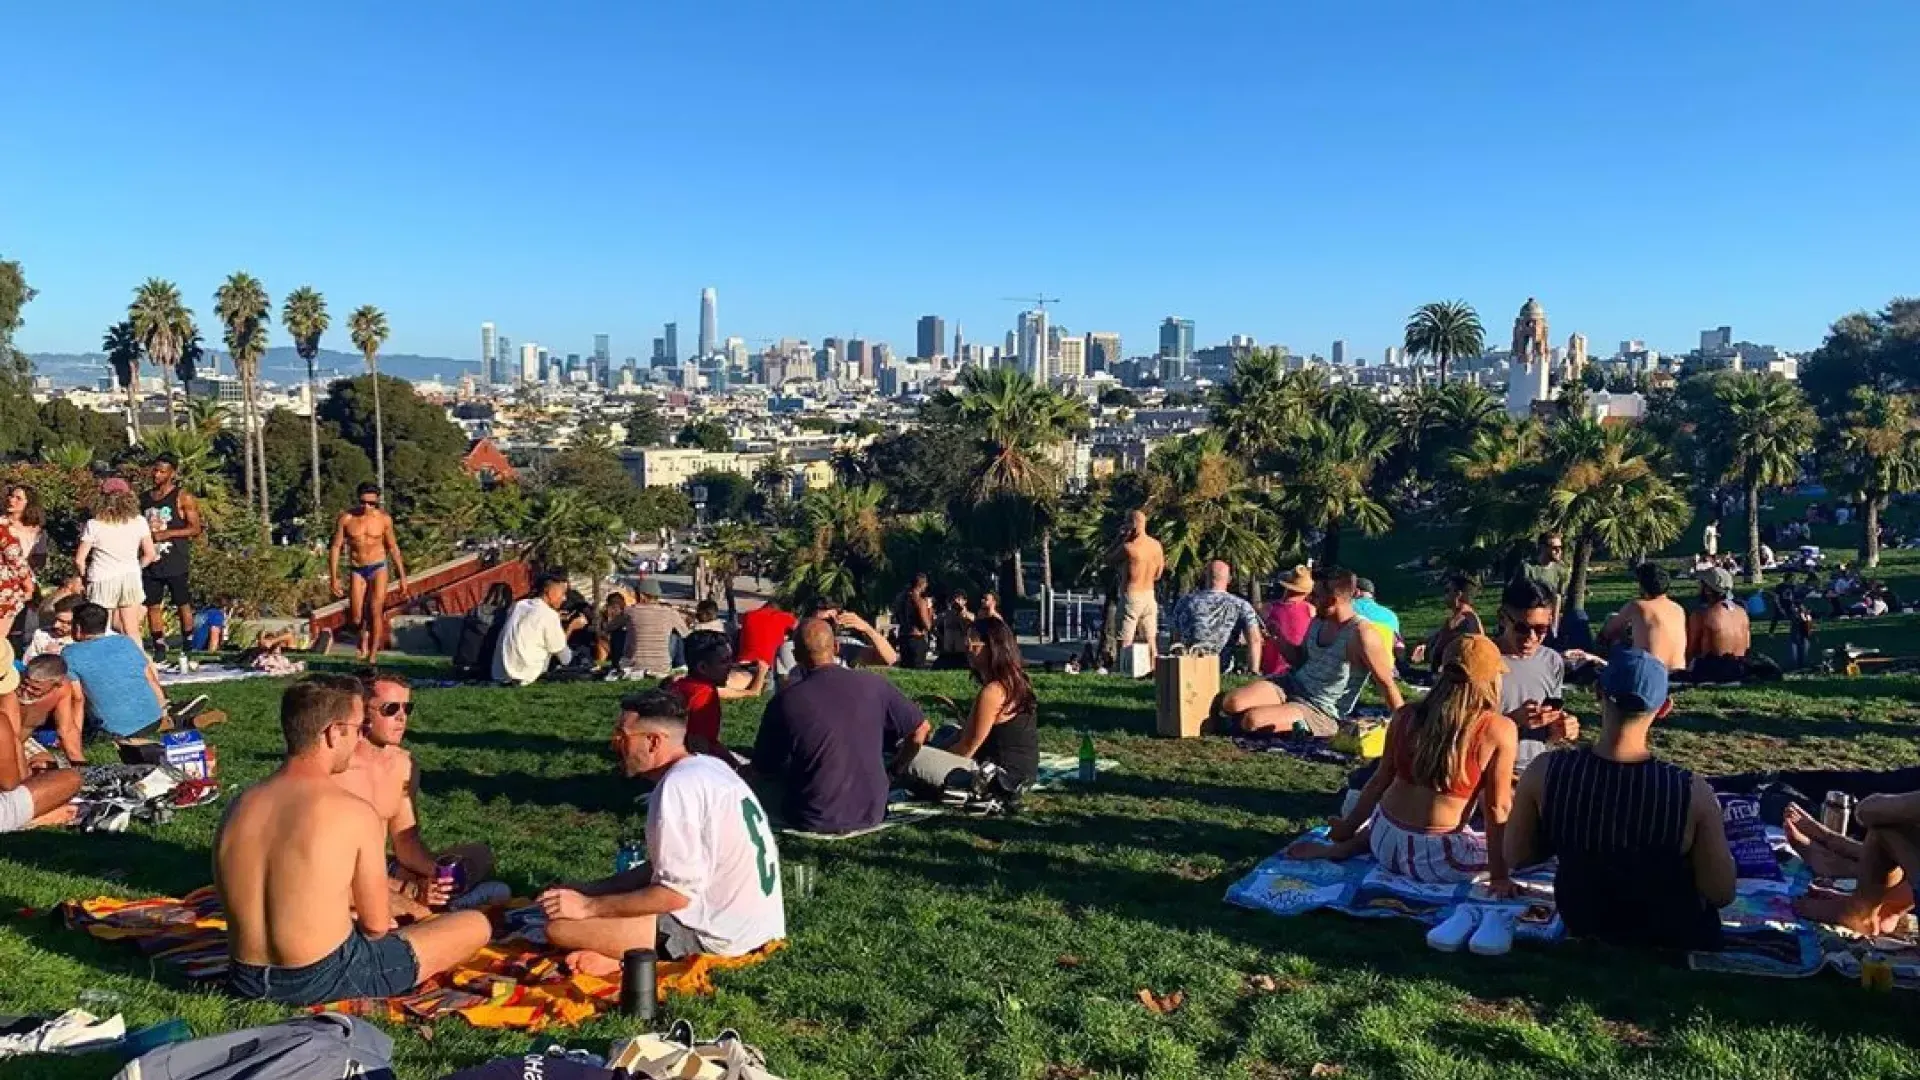 Groups of residents and visitors alike enjoy picnics in Dolores Park.